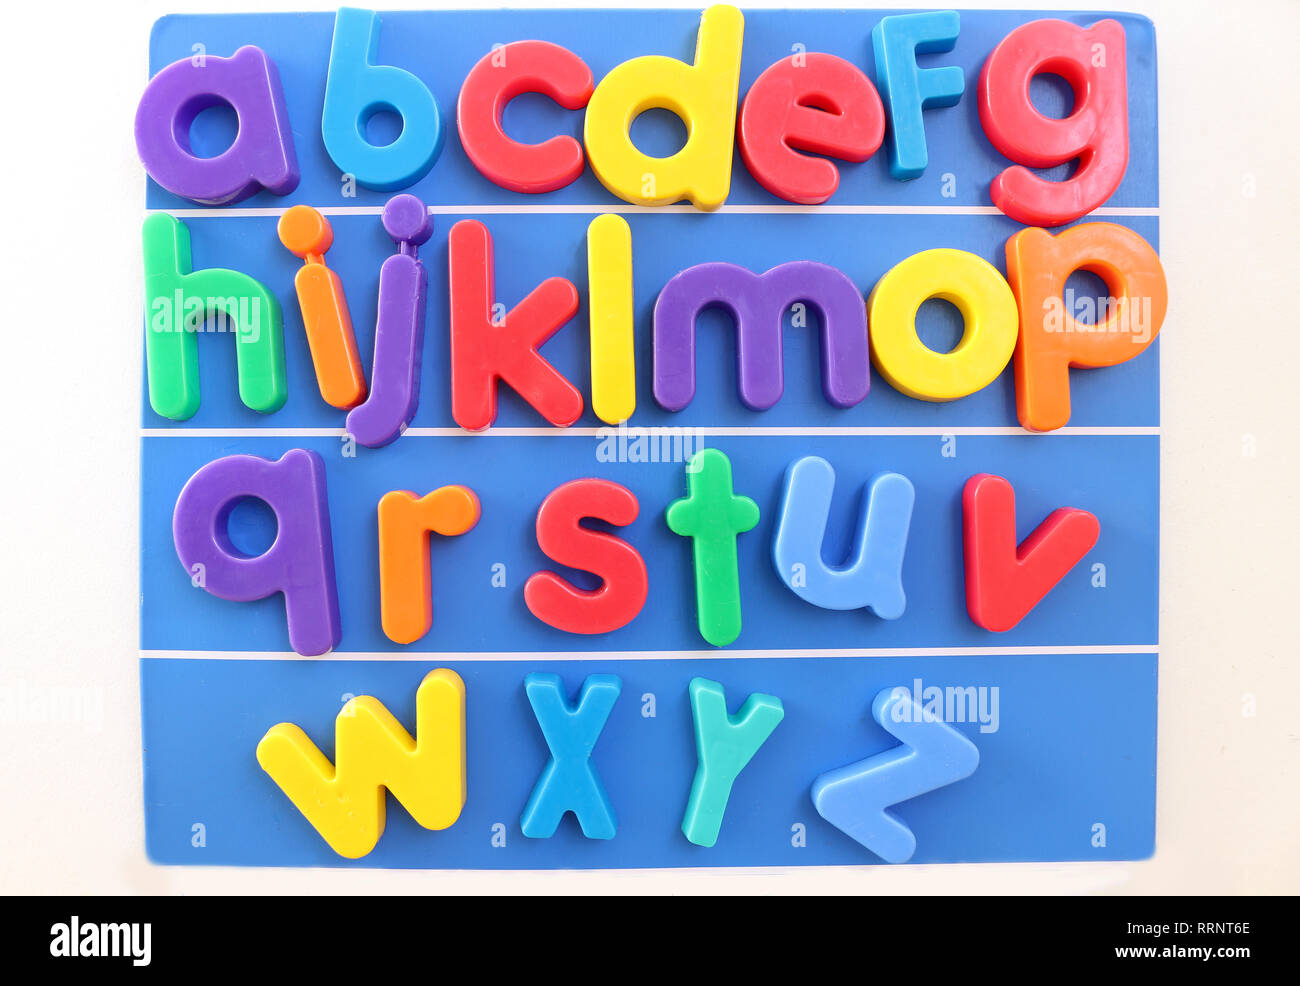 colorful-magnetic-plastic-alphabet-letters-in-alphabetical-order-stock-photo-alamy